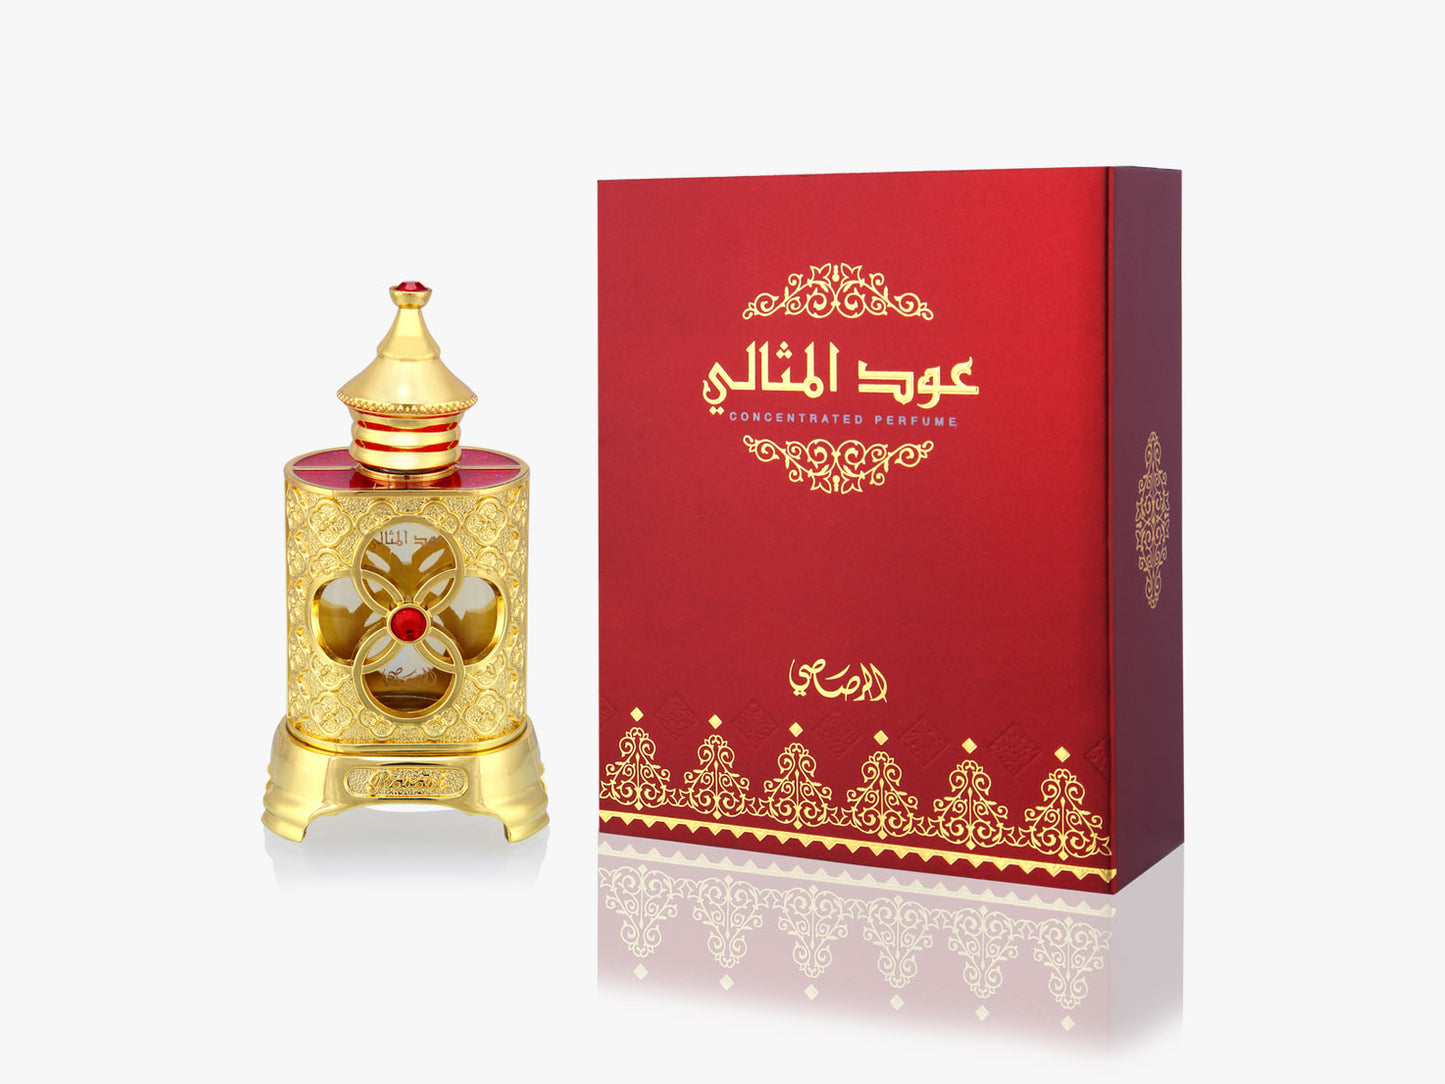 OUDH AL METHALI CONCENTRATED PERFUME - 15ml